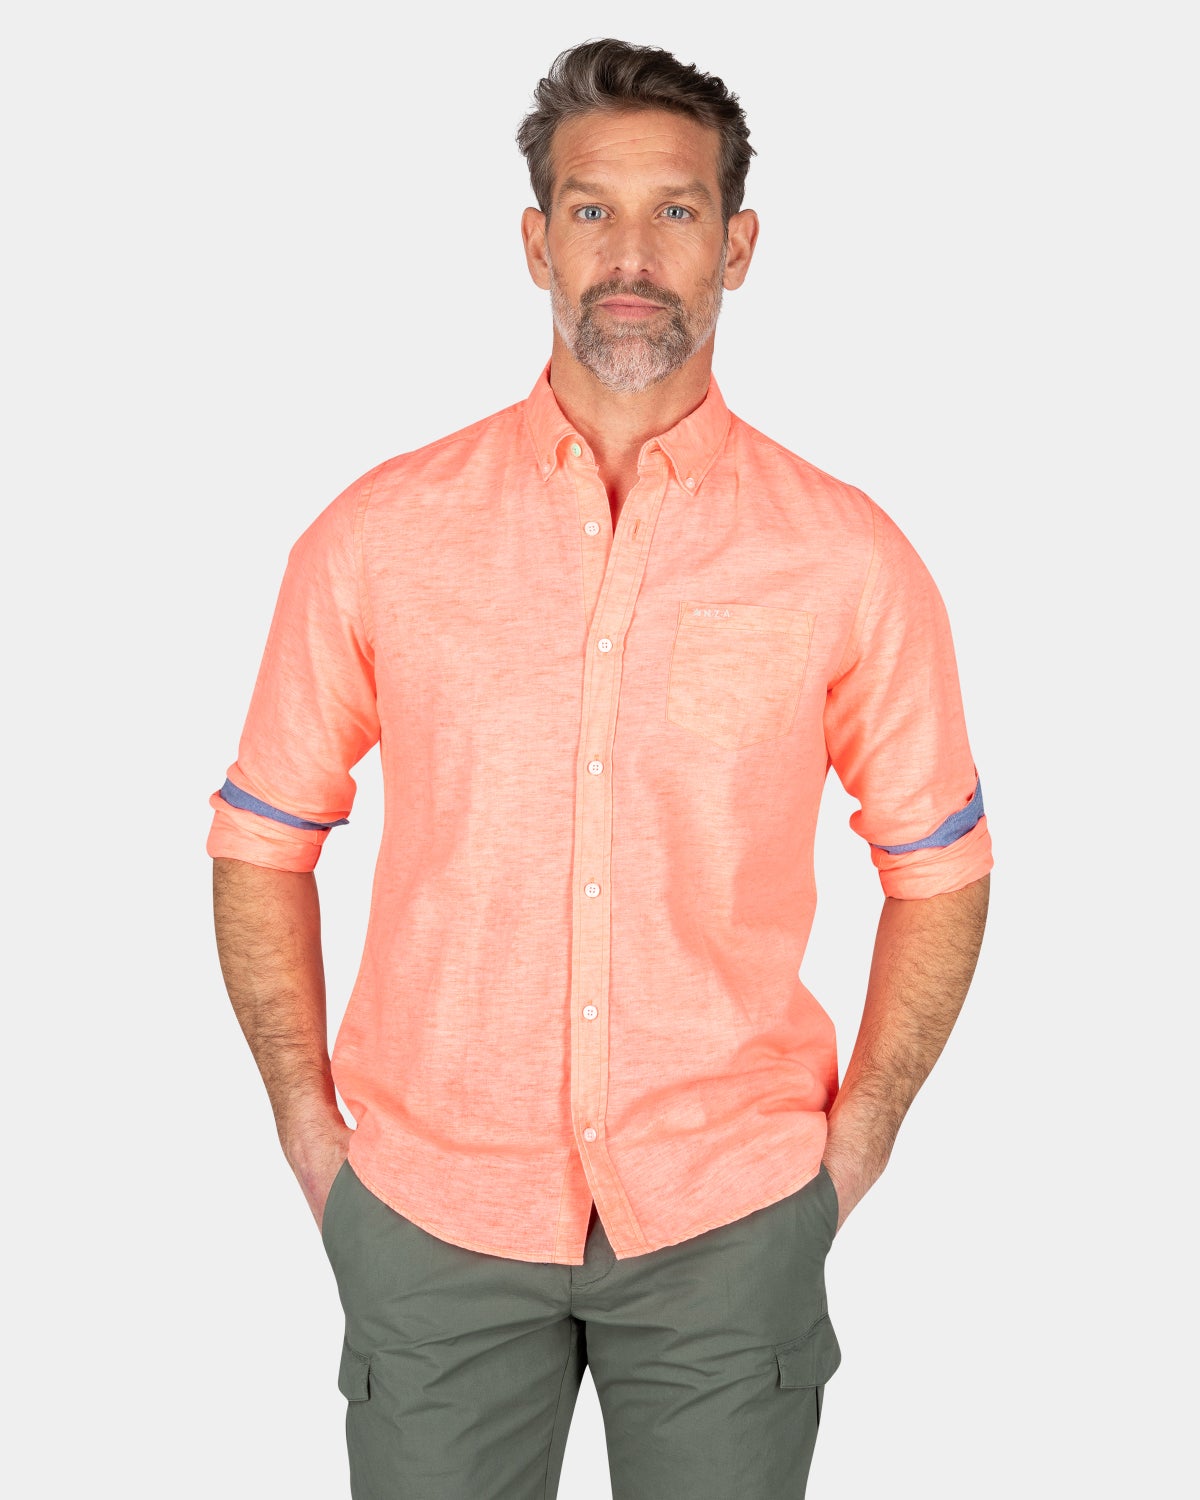 Plain linen shirt in many colors - Fury Pink